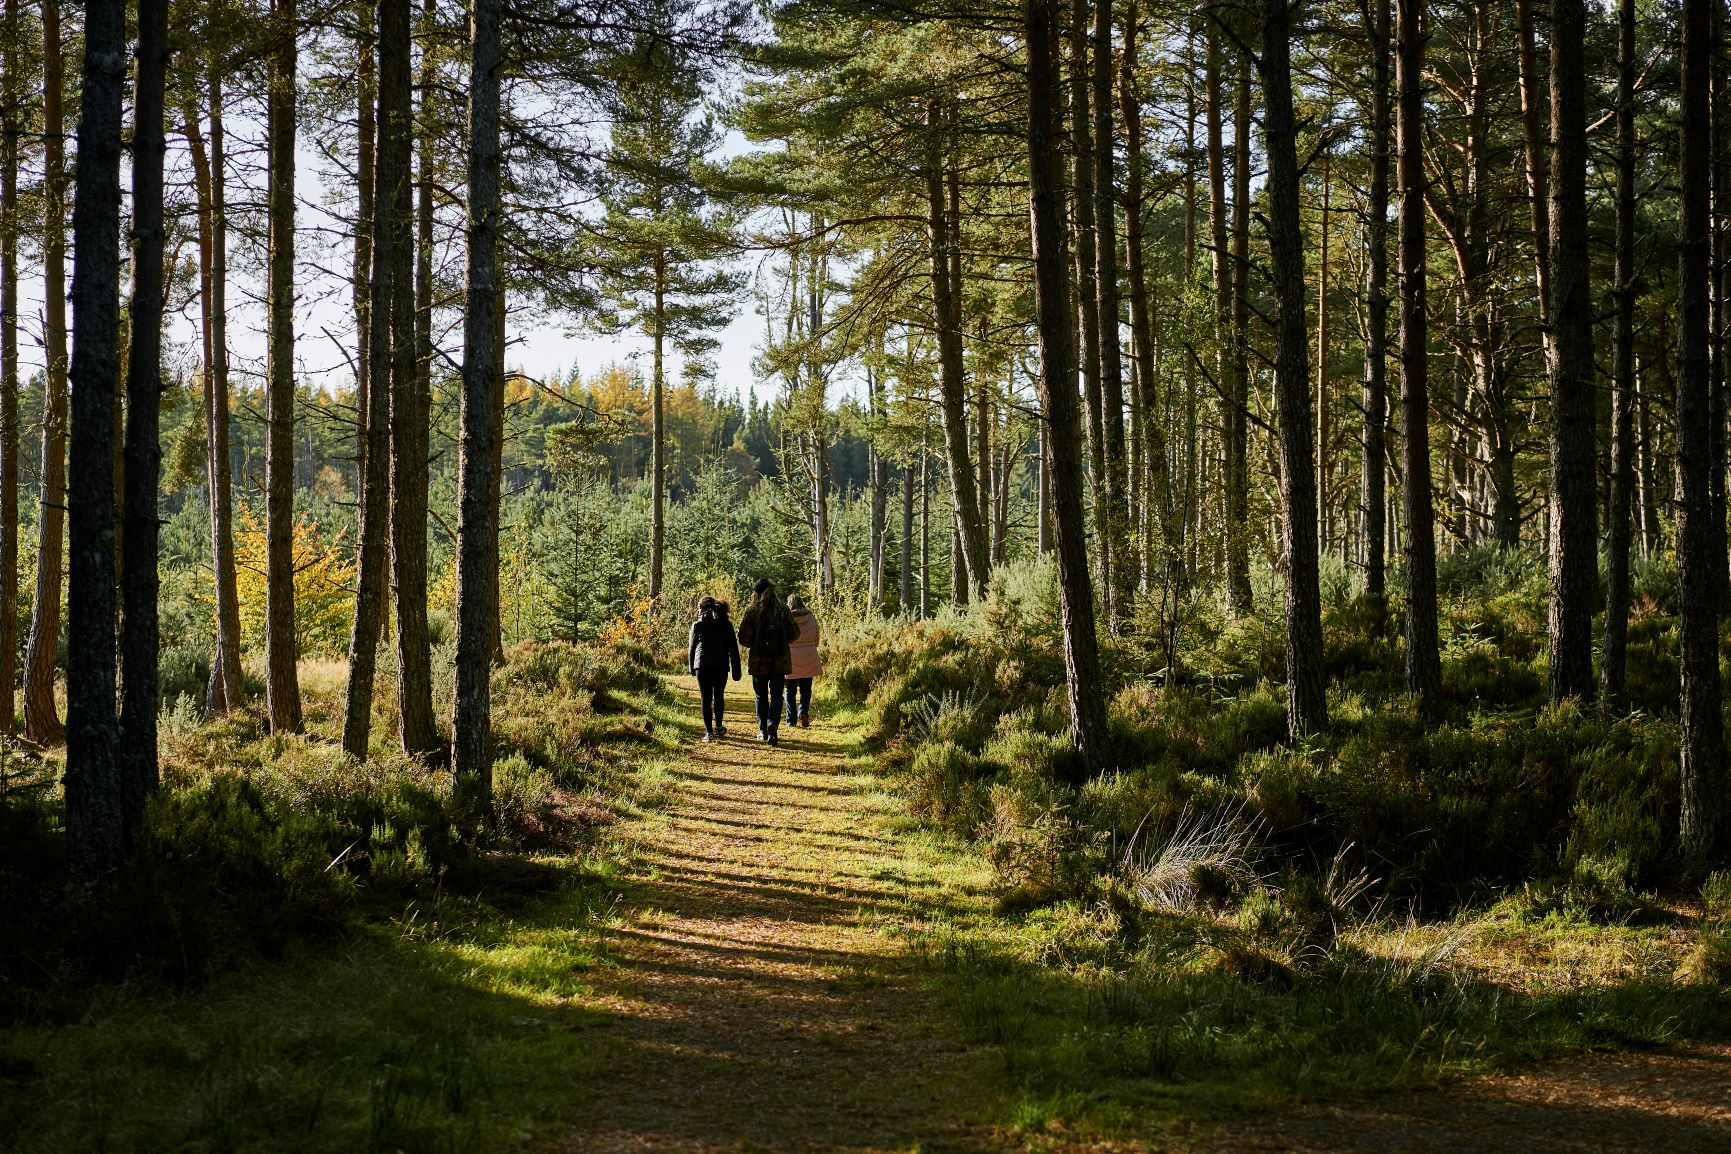 New woodland survey shows strong support for more woodlands in Highlands